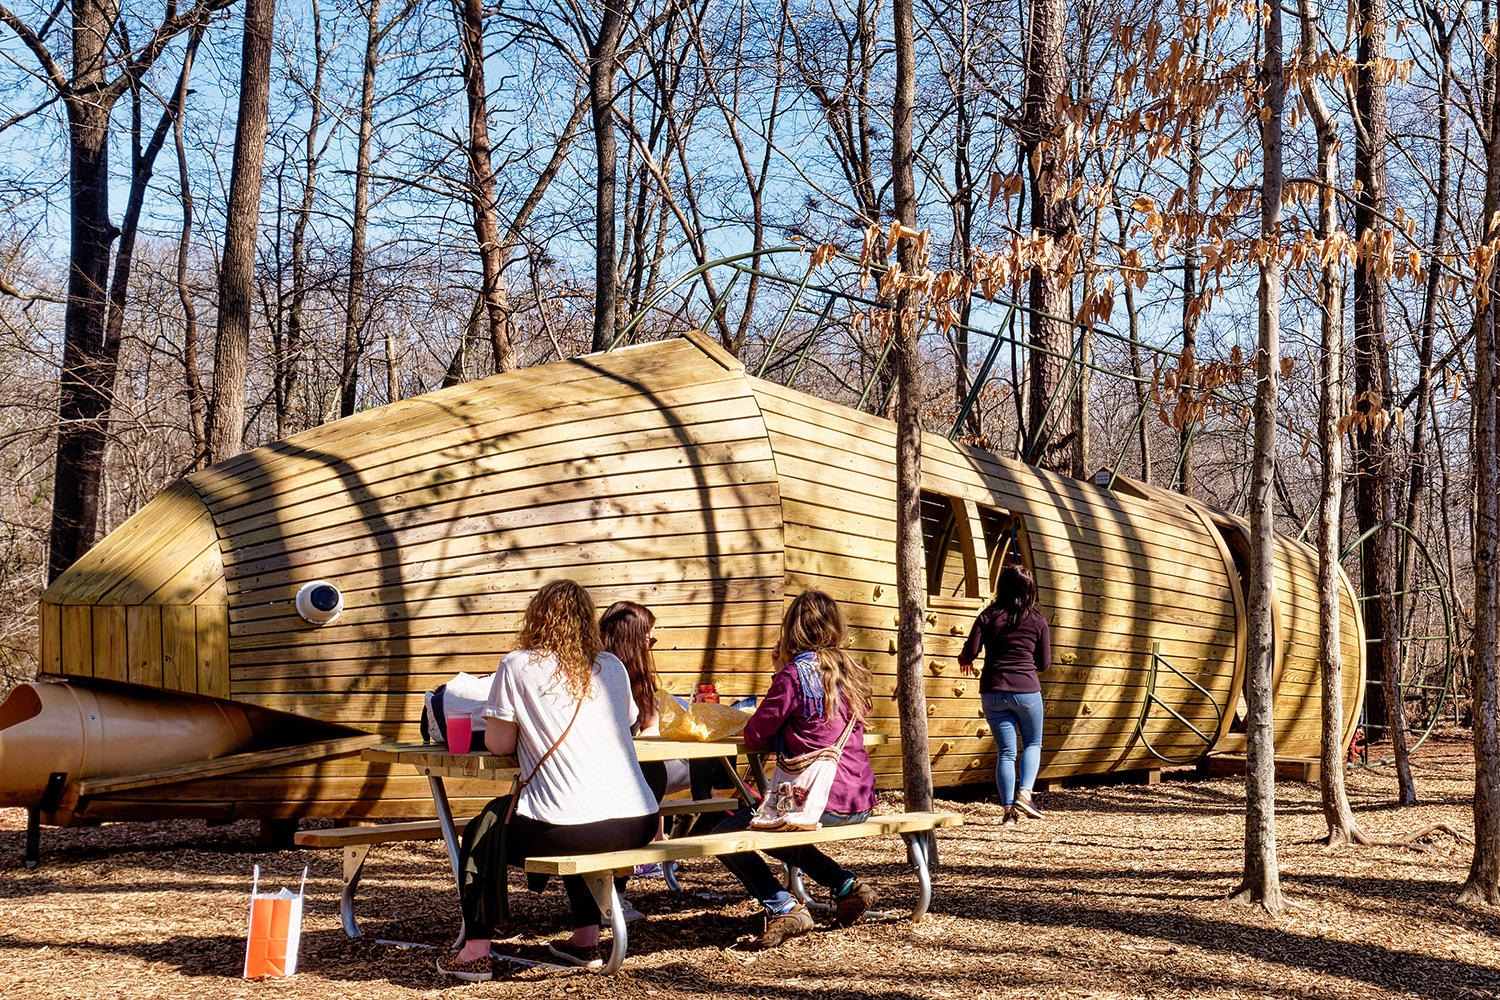 The huge wooden fish slide at the playground measures 45 feet and weighs six tons